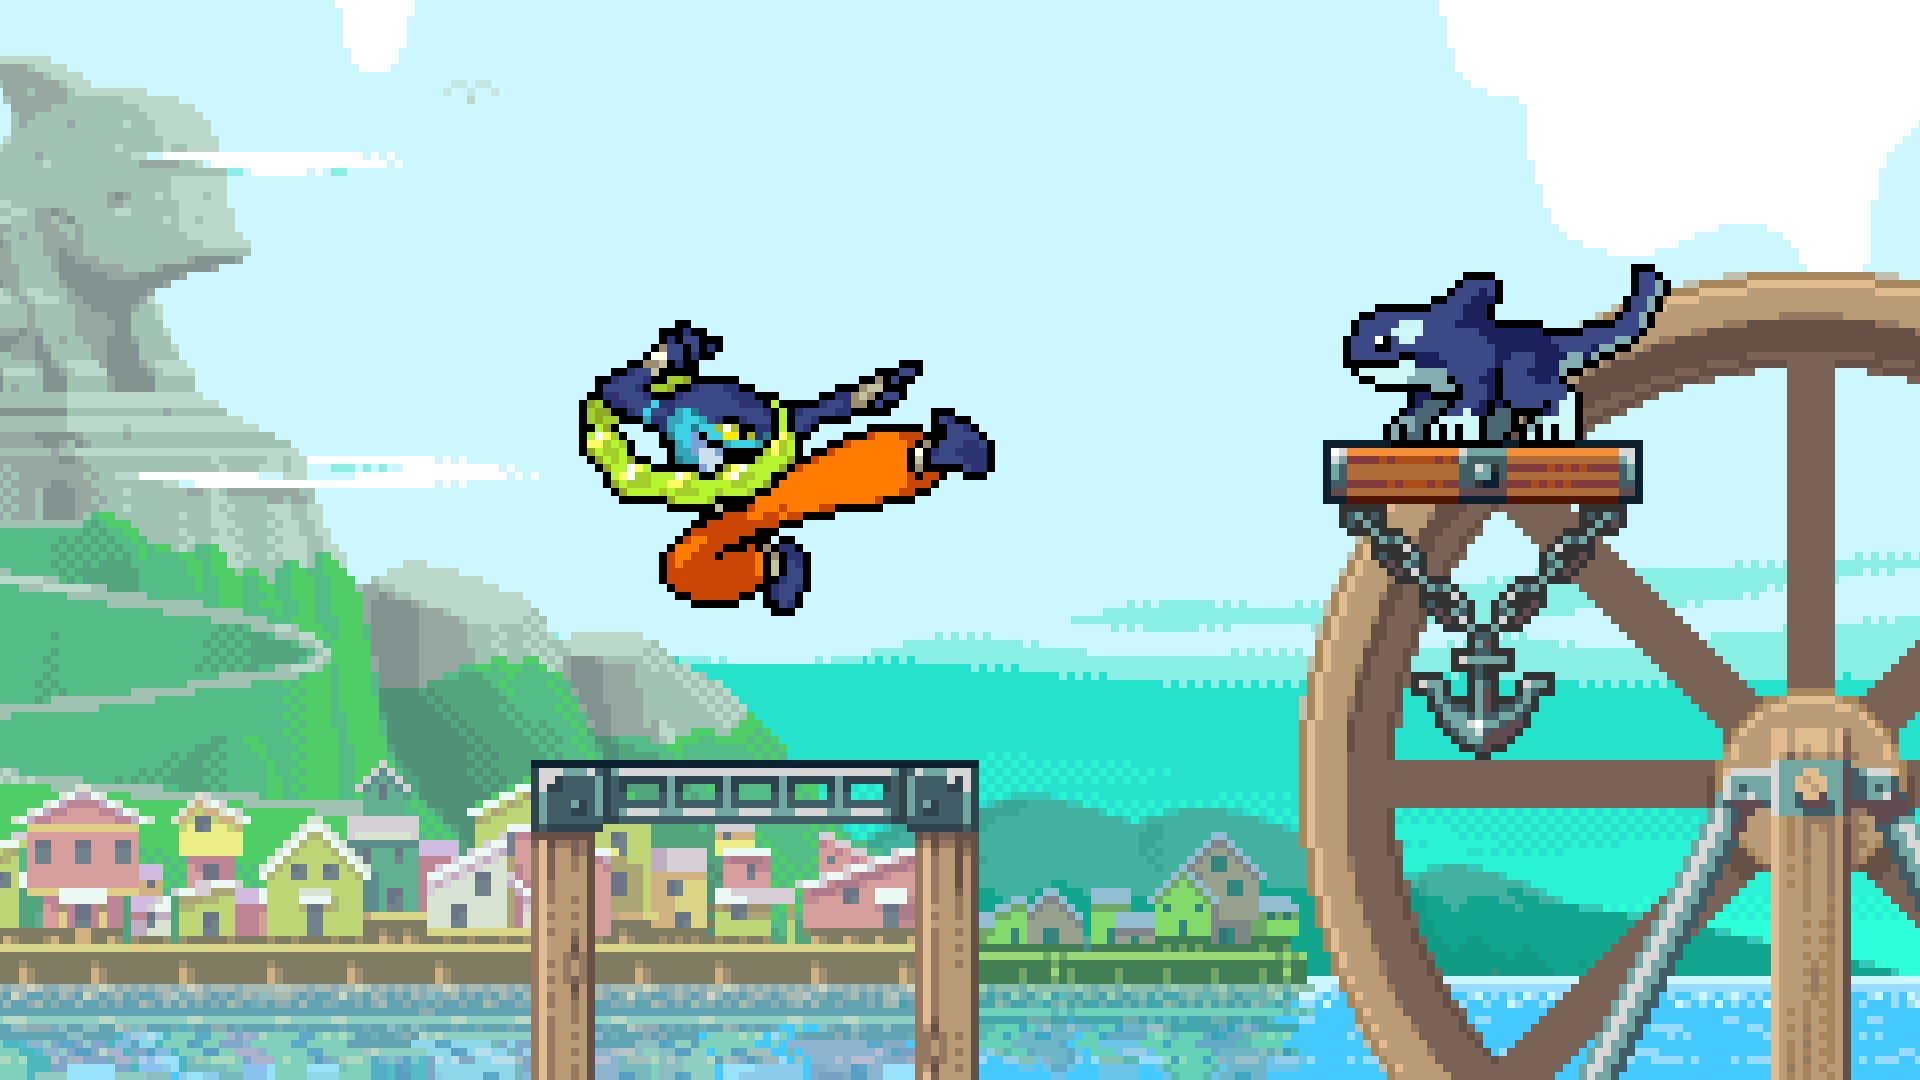 clairen rivals of aether